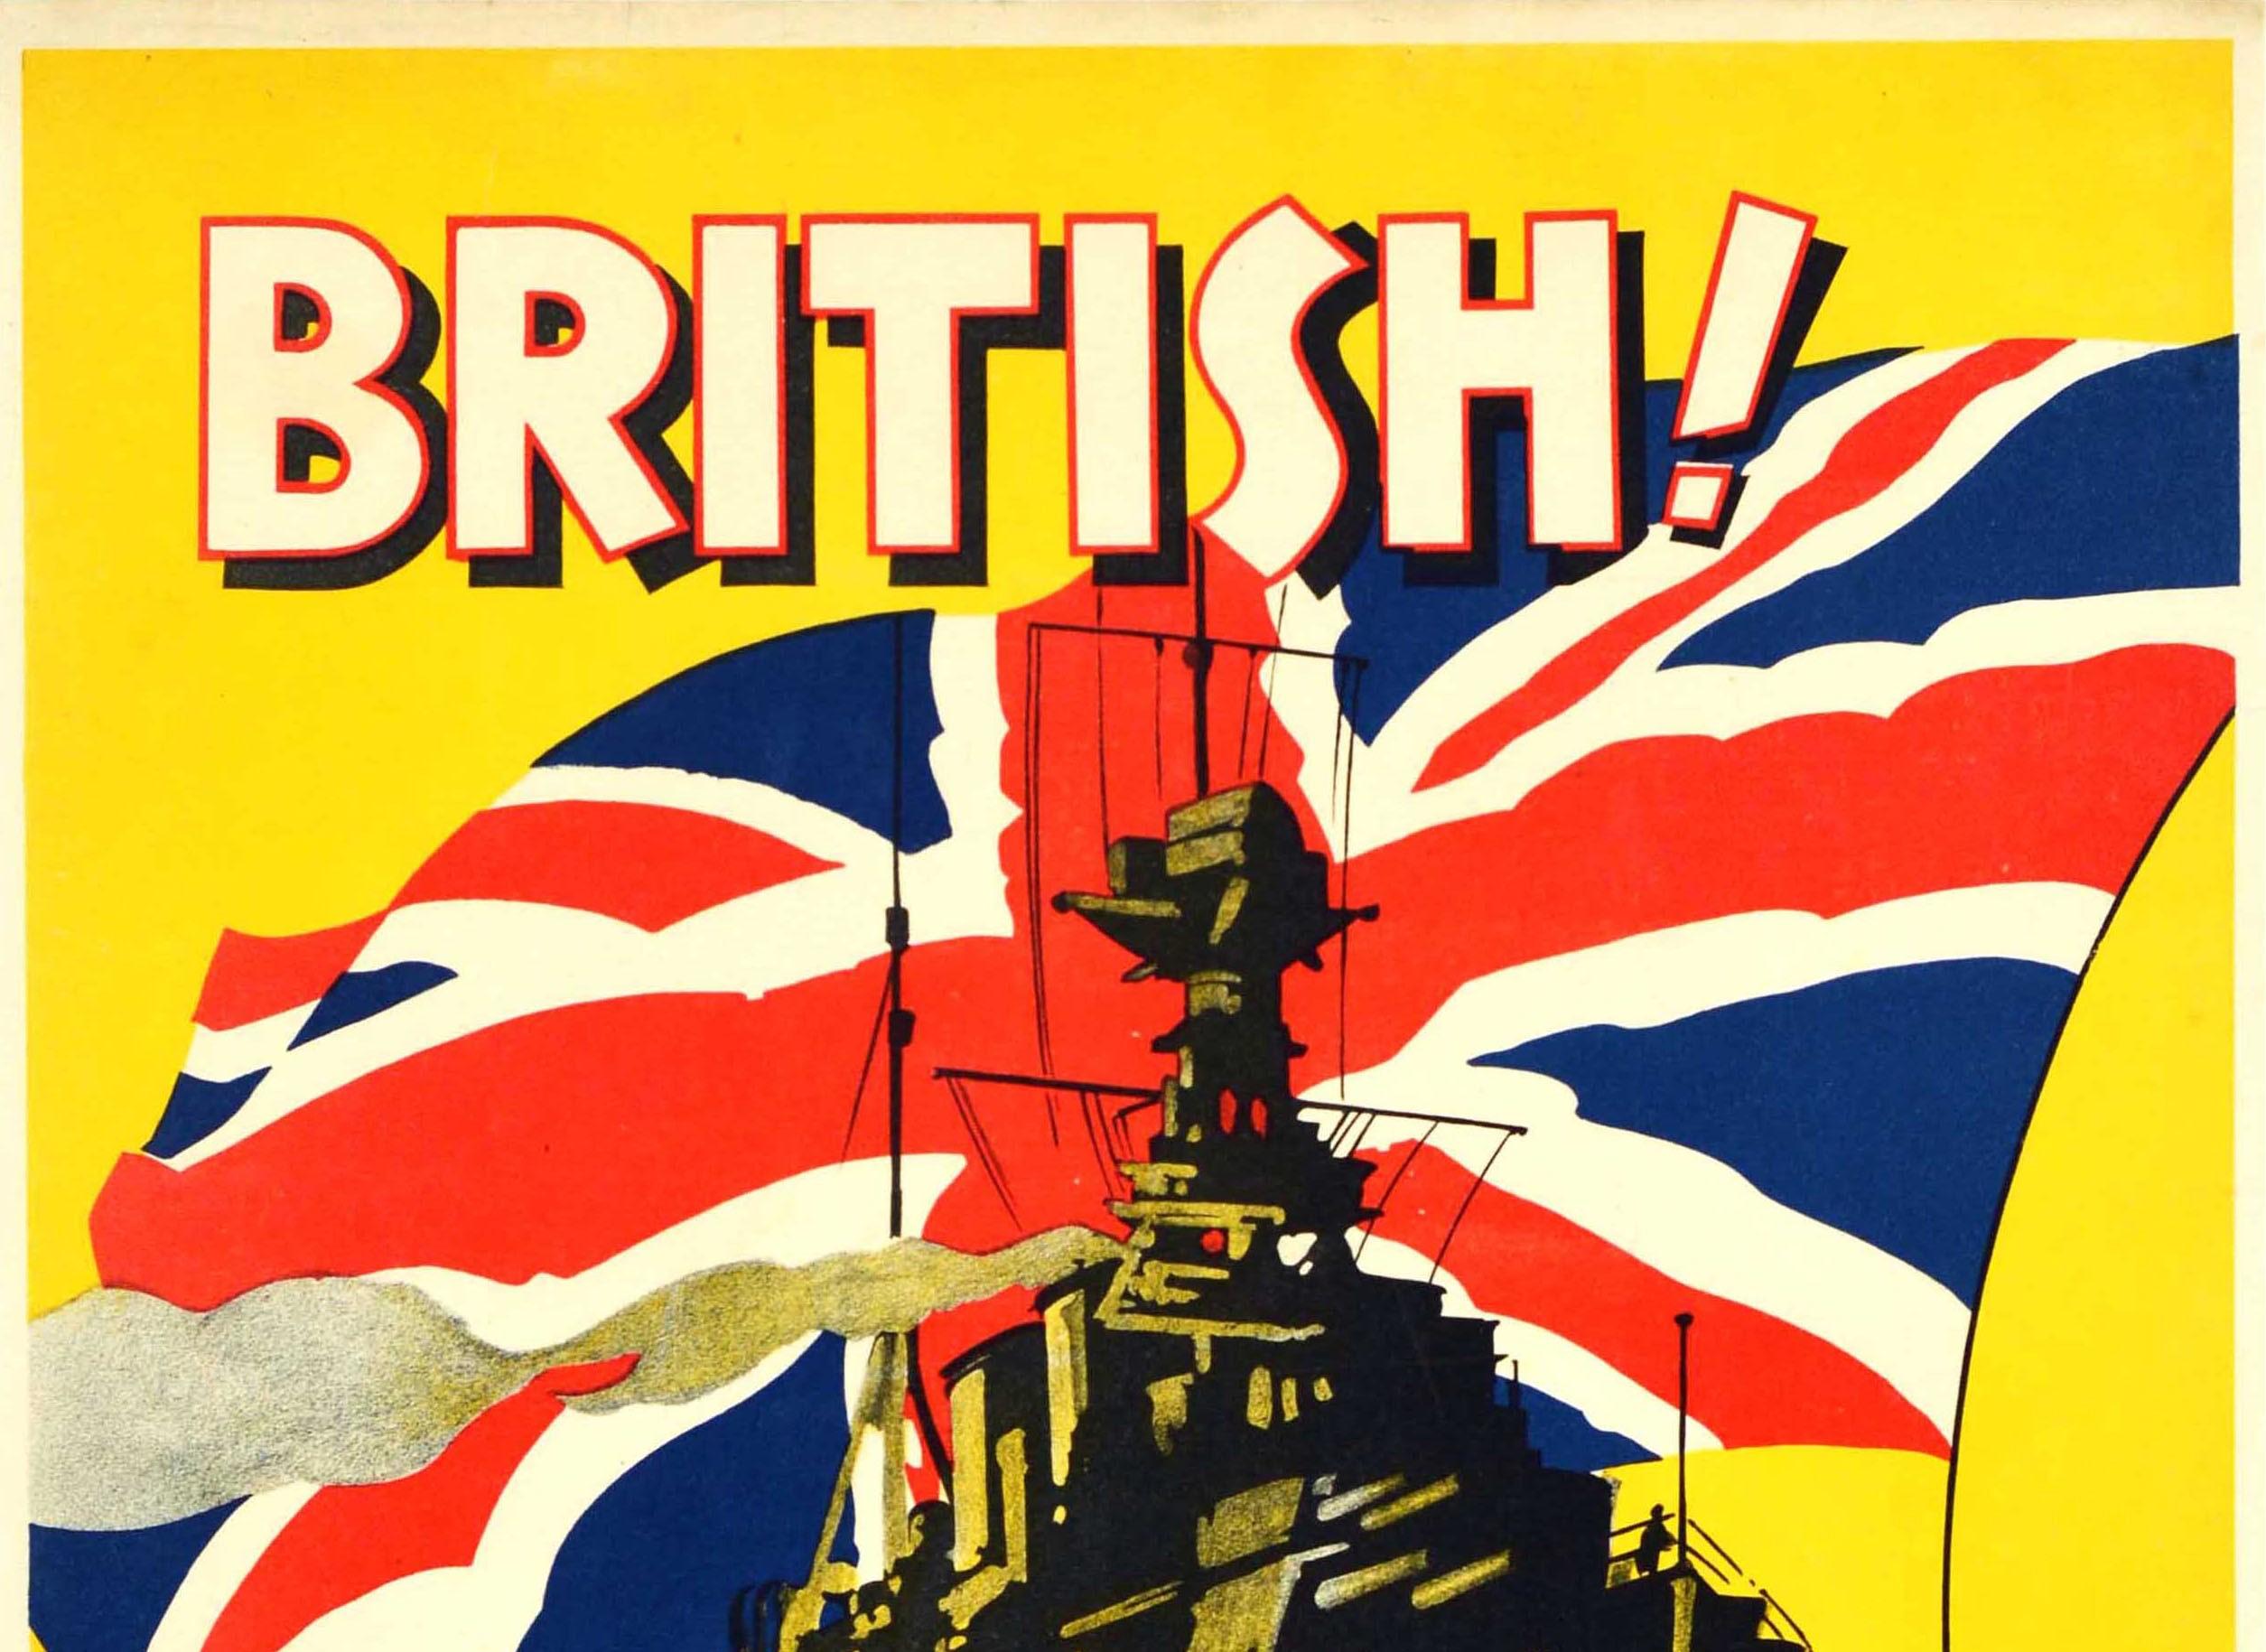 Original vintage workplace motivational poster - British! And proud of it Make every job a standard for others to follow! Bill Jones - featuring a colourful image of a battleship sailing across a blue sea towards the viewer against a yellow sky with